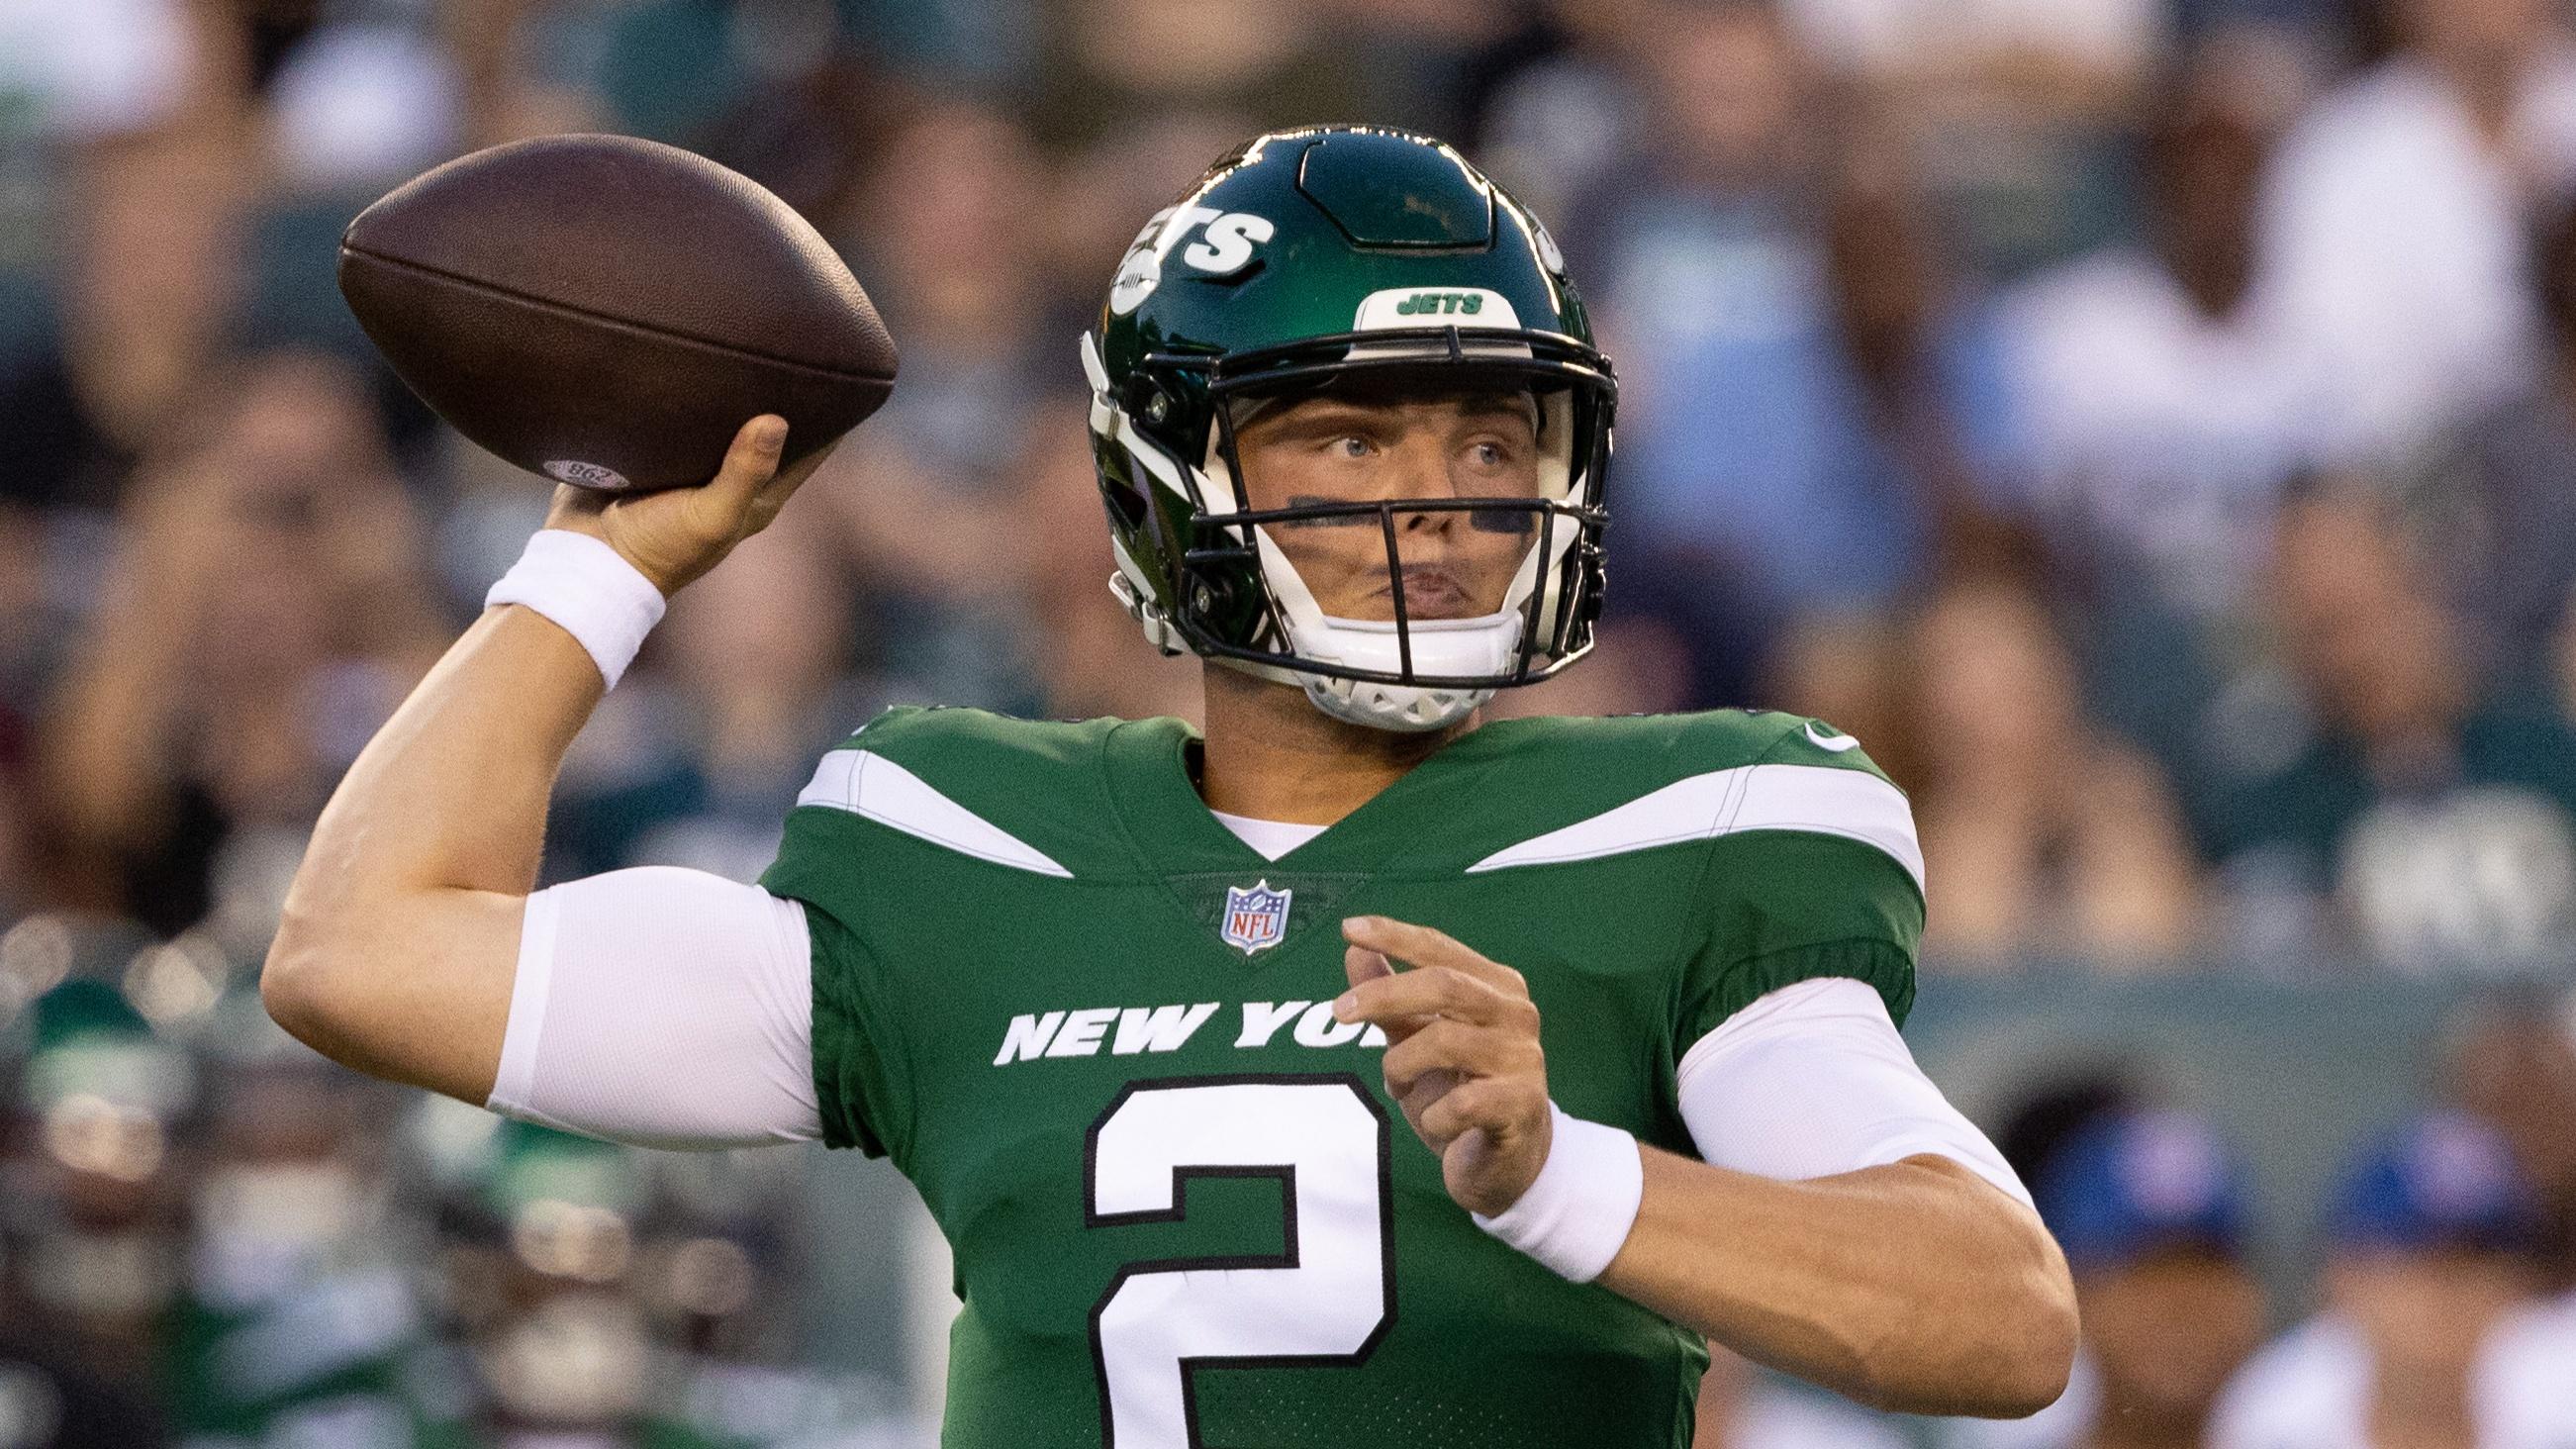 Aug 12, 2022; Philadelphia, Pennsylvania, USA; New York Jets quarterback Zach Wilson (2) passes the ball against the Philadelphia Eagles during the first quarter at Lincoln Financial Field. Mandatory Credit: Bill Streicher-USA TODAY Sports / © Bill Streicher-USA TODAY Sports